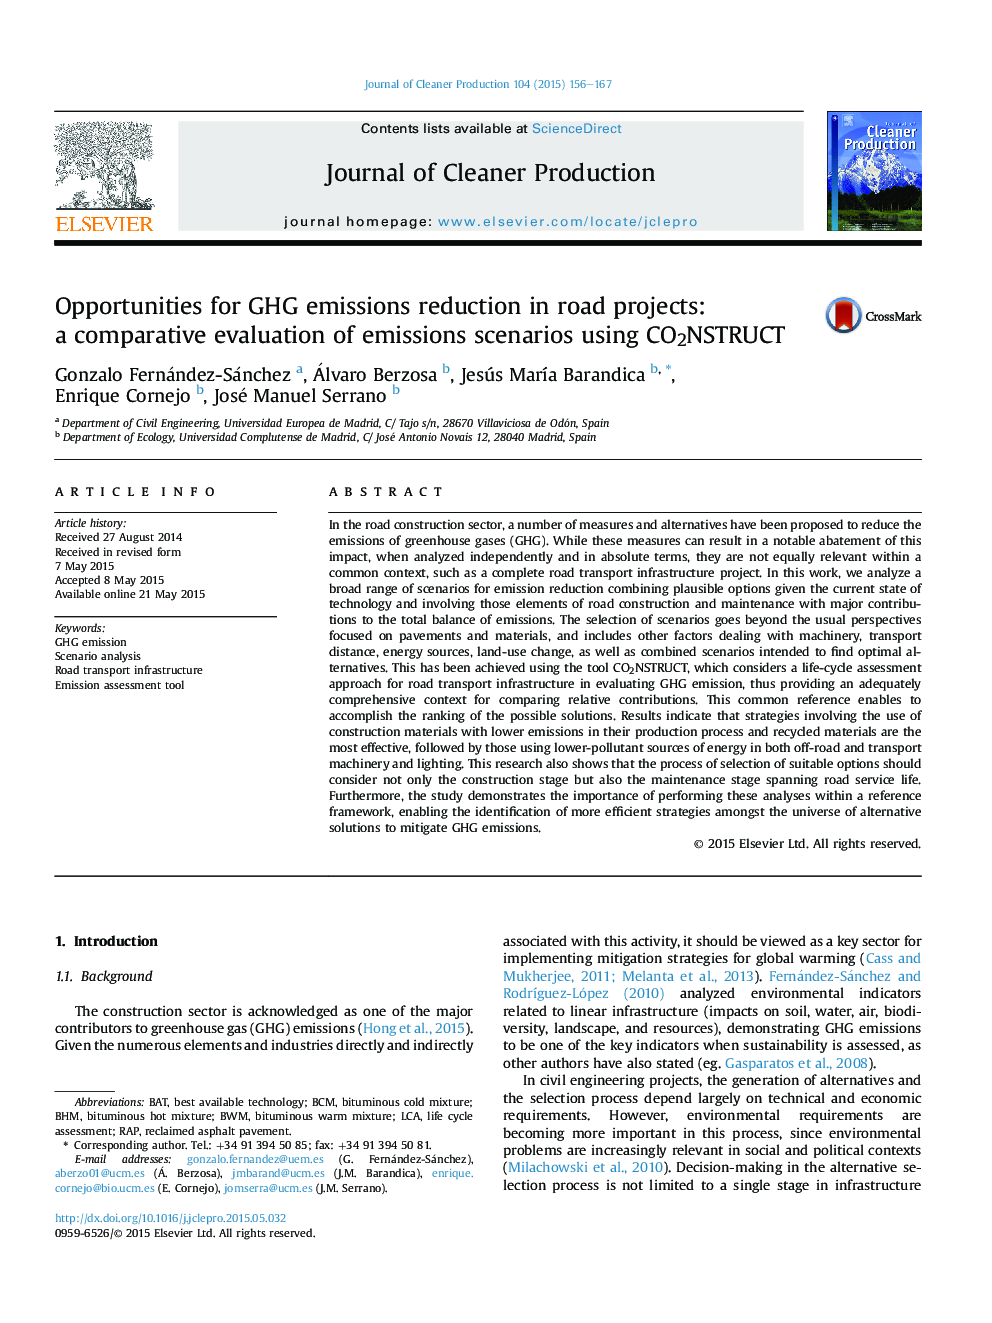 Opportunities for GHG emissions reduction in road projects: a comparative evaluation of emissions scenarios using CO2NSTRUCT